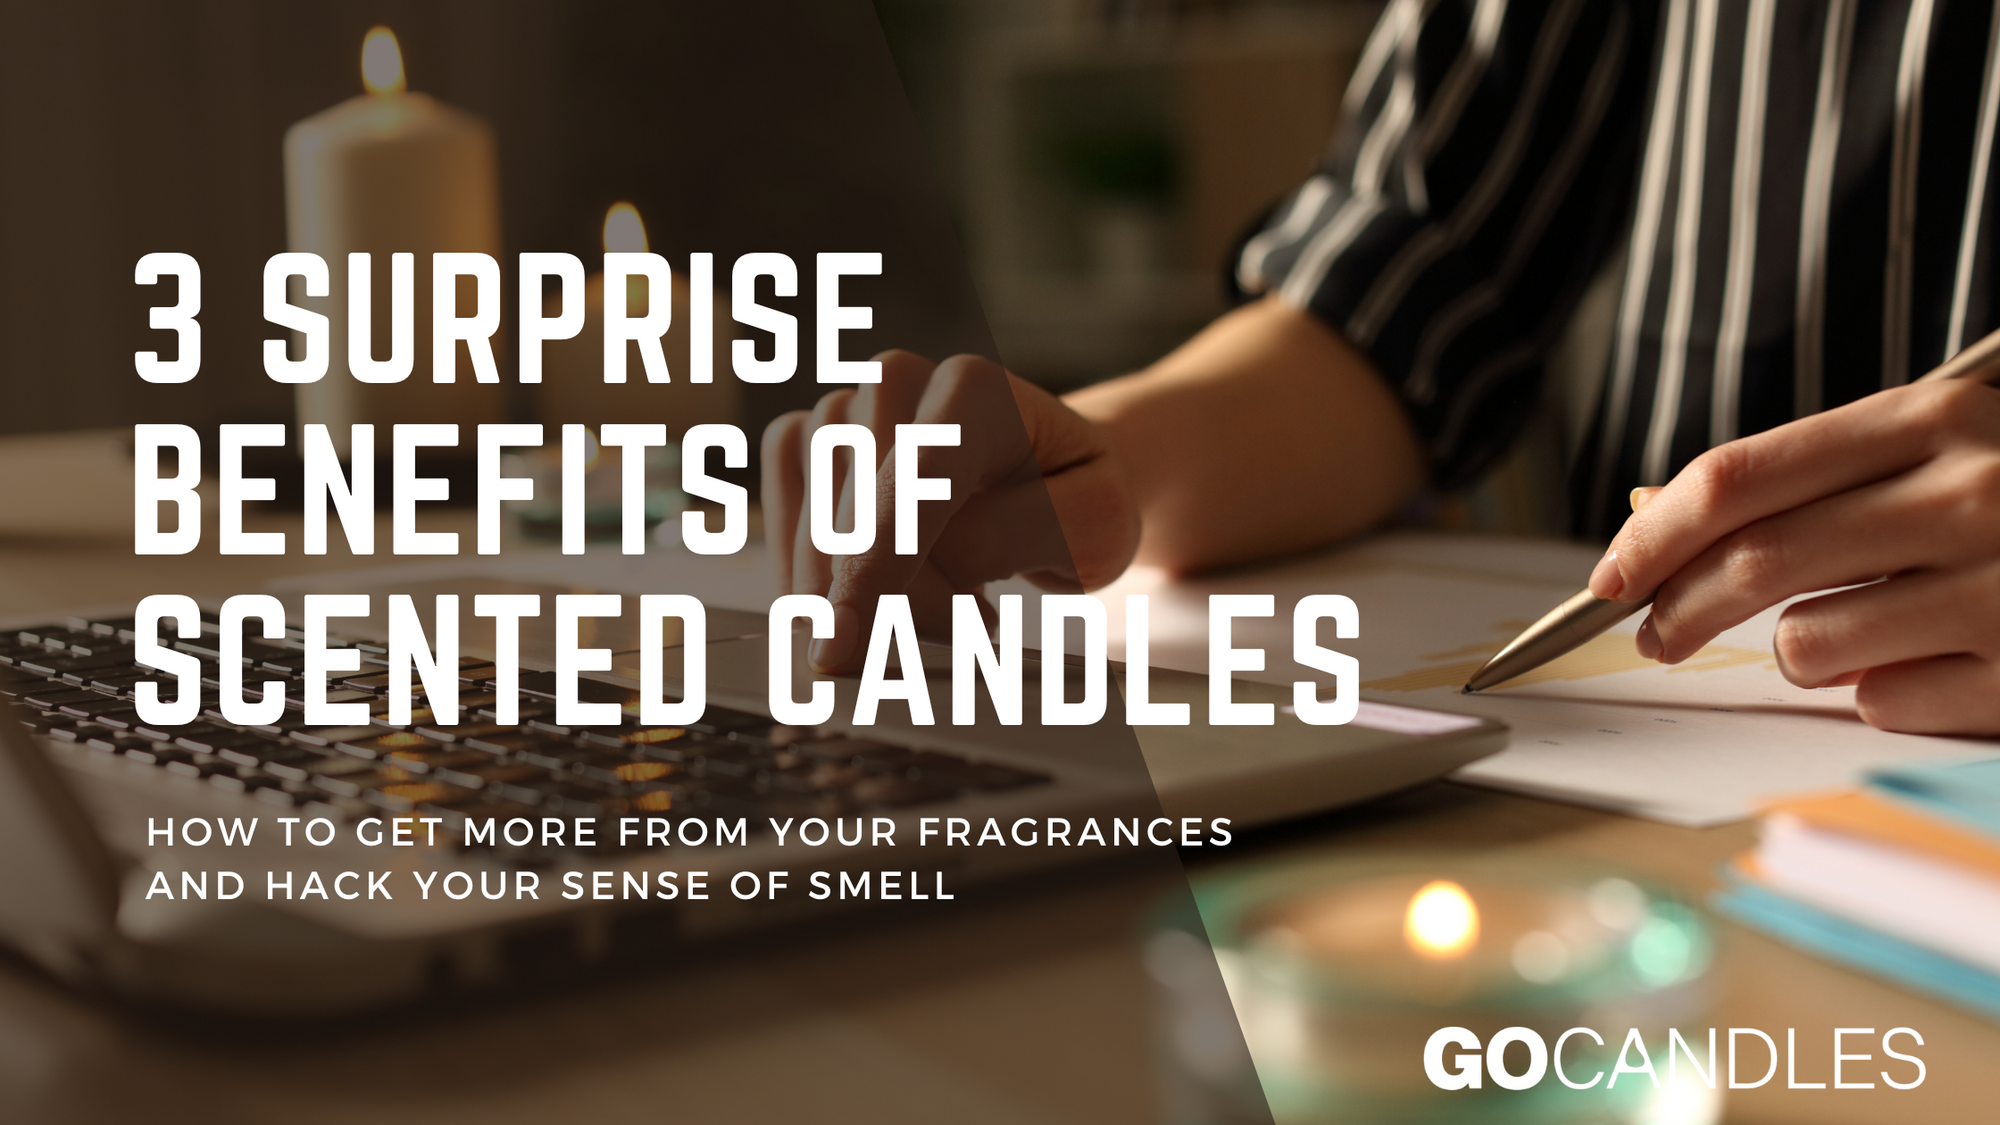 3 Surprise Benefits of Scented Candles